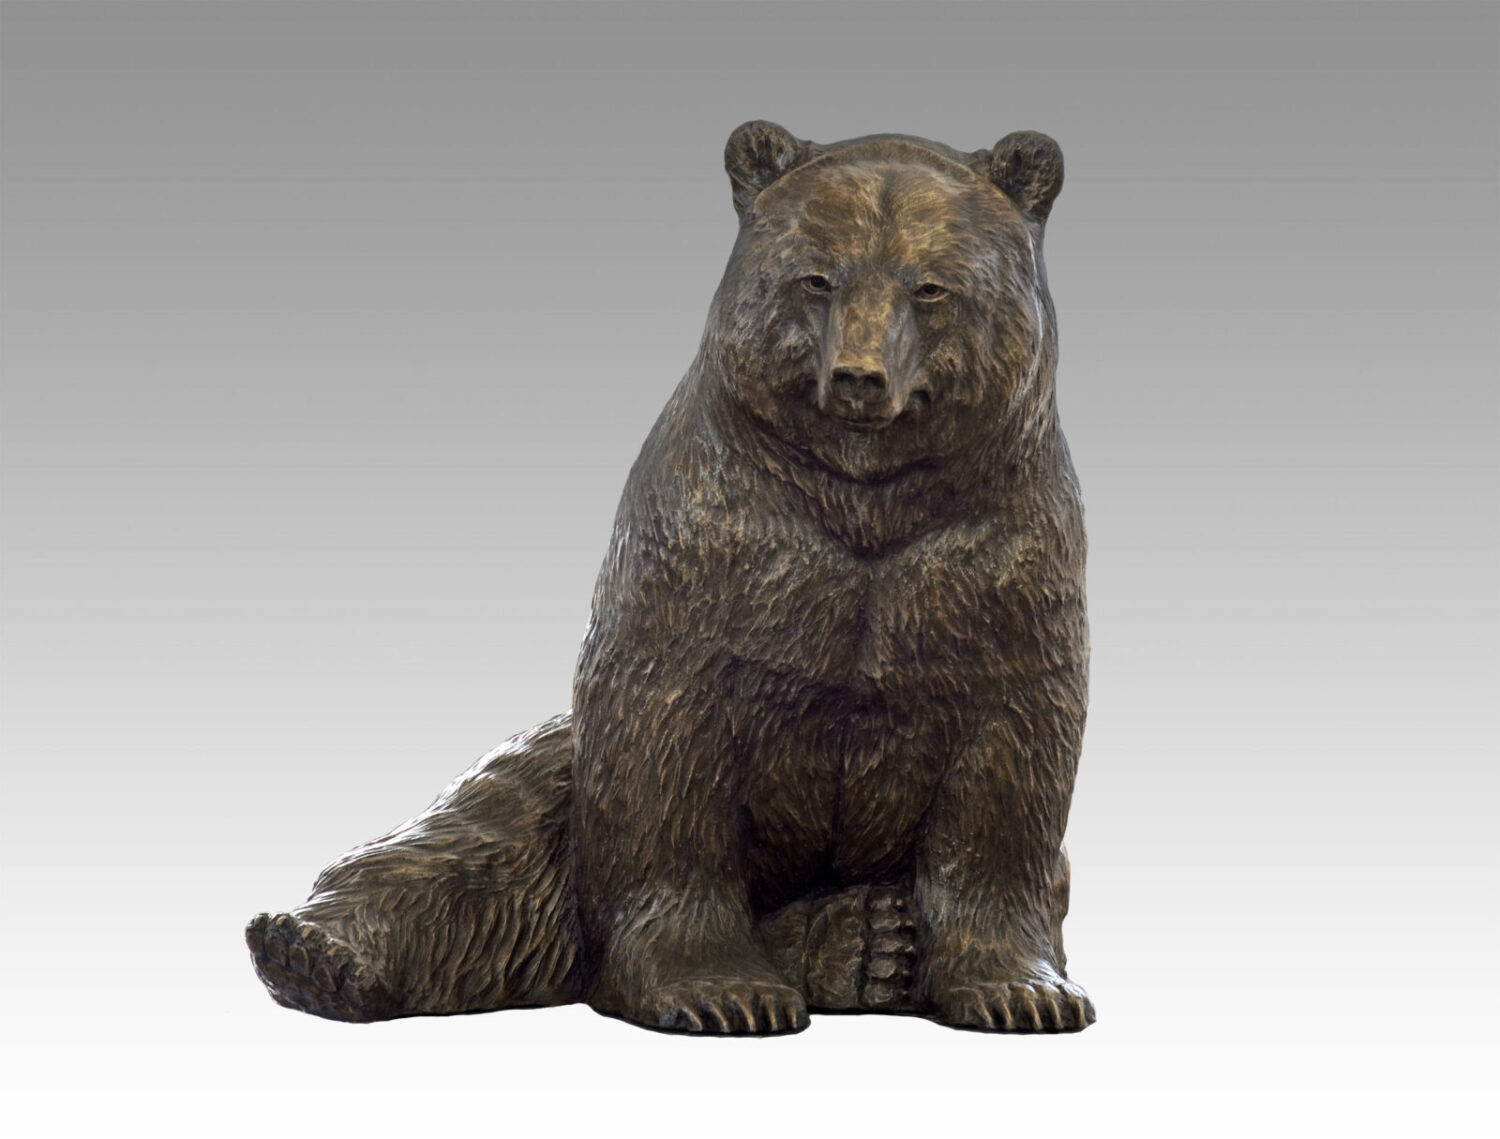 Gallery, Bear Pause, $3,000 CAD, Metal Infused (Exterior/Interior), 31” W x 25 ½" H, Edition 15, Wildlife Sculpture of a bear in sitting position, Sculptor Tyler Fauvelle